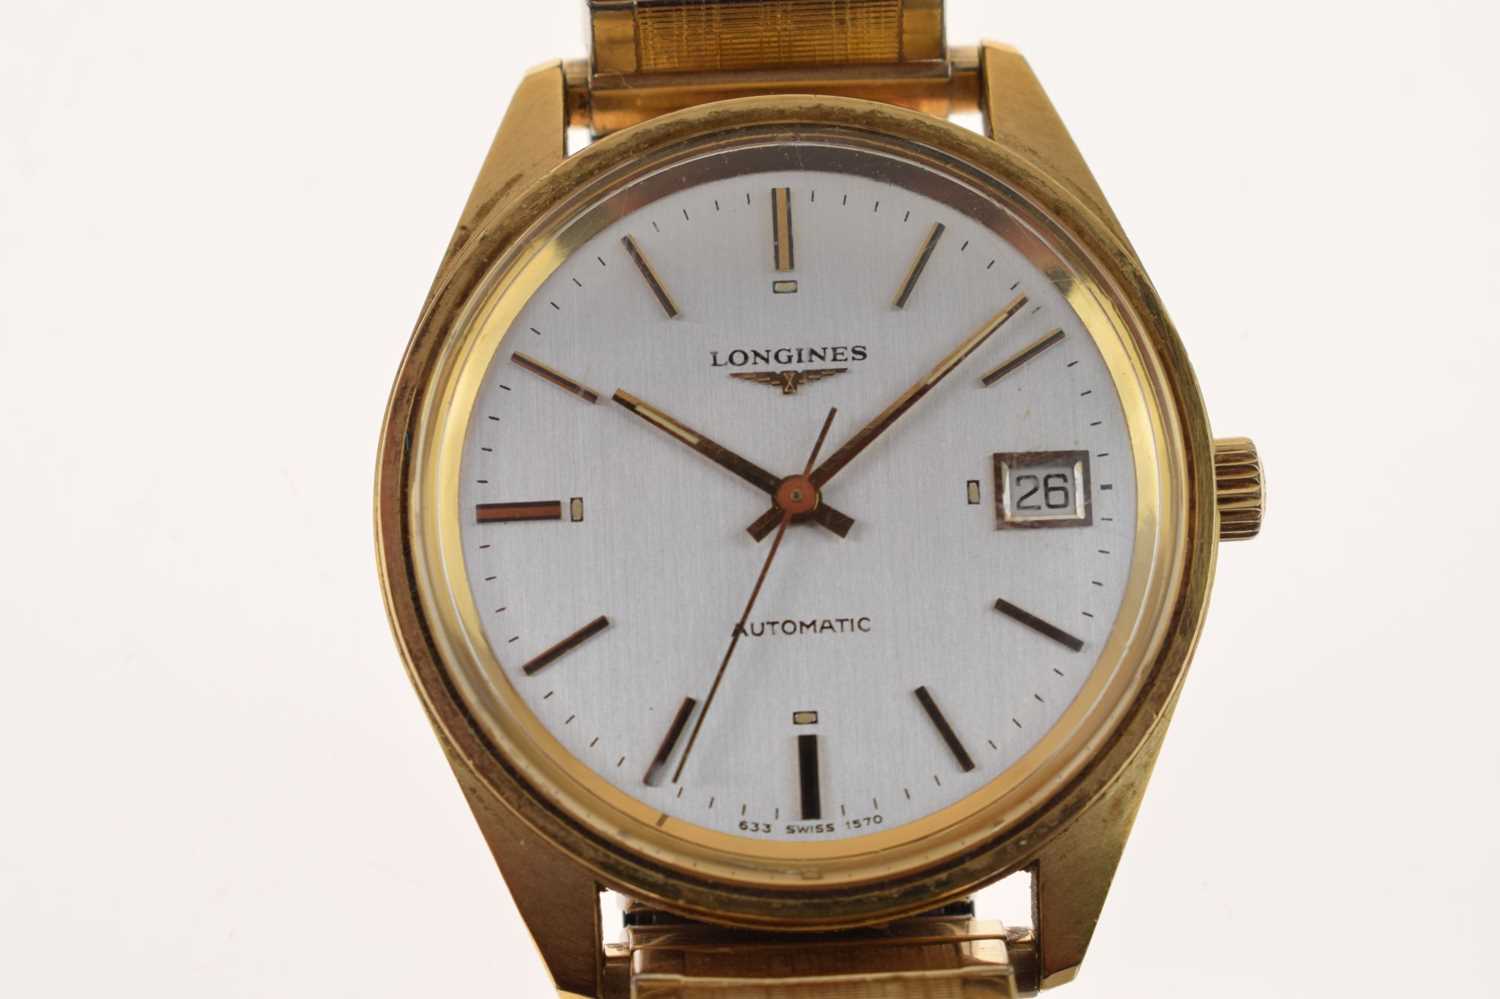 Longines - Gentleman's gold plated automatic bracelet watch - Image 3 of 8